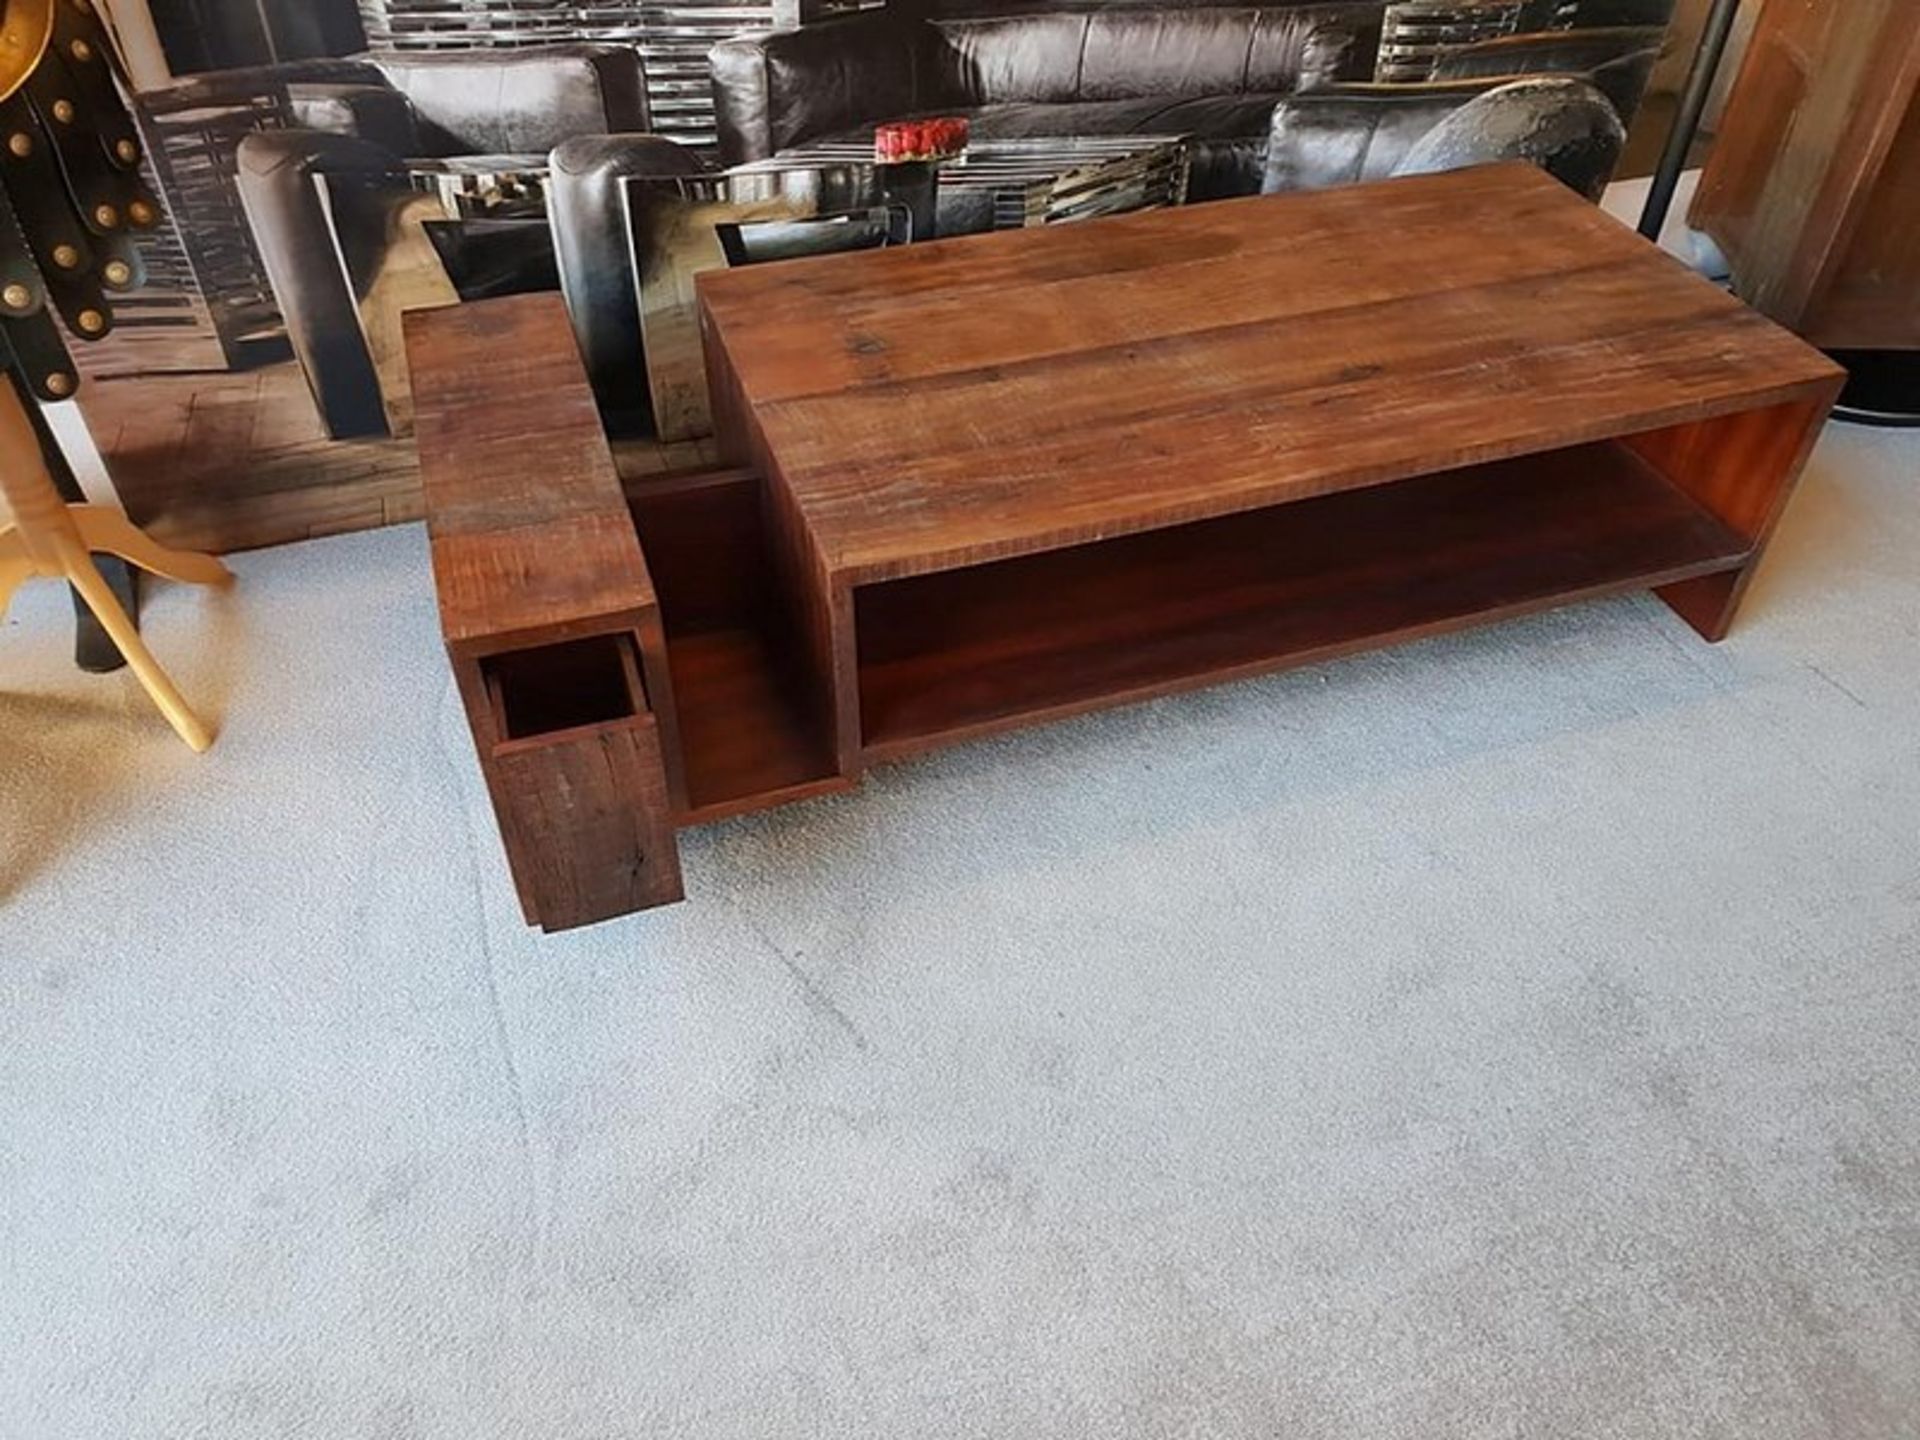 Coffee Table - Avett CoffeeTable Hand-Crafted From Exotic Demolition Hardwoods,The Avett CoffeeTable